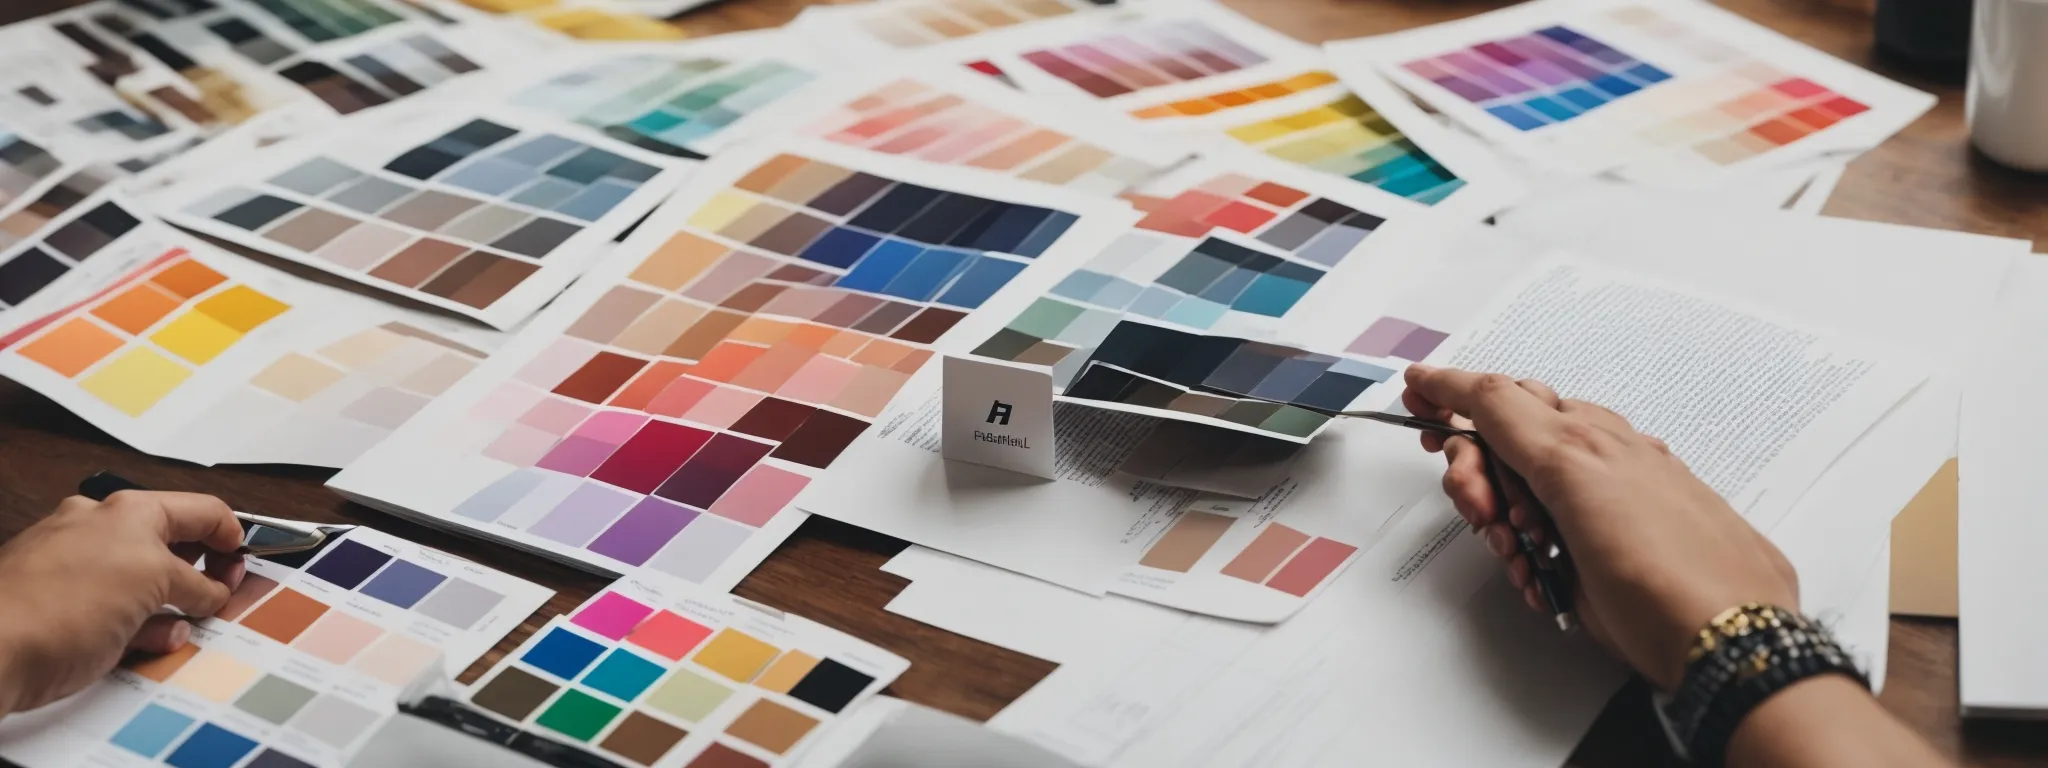 A Brand Designer Sketches Bold Logo Concepts On A Blank Canvas Amidst Color Swatches And Typography Samples.